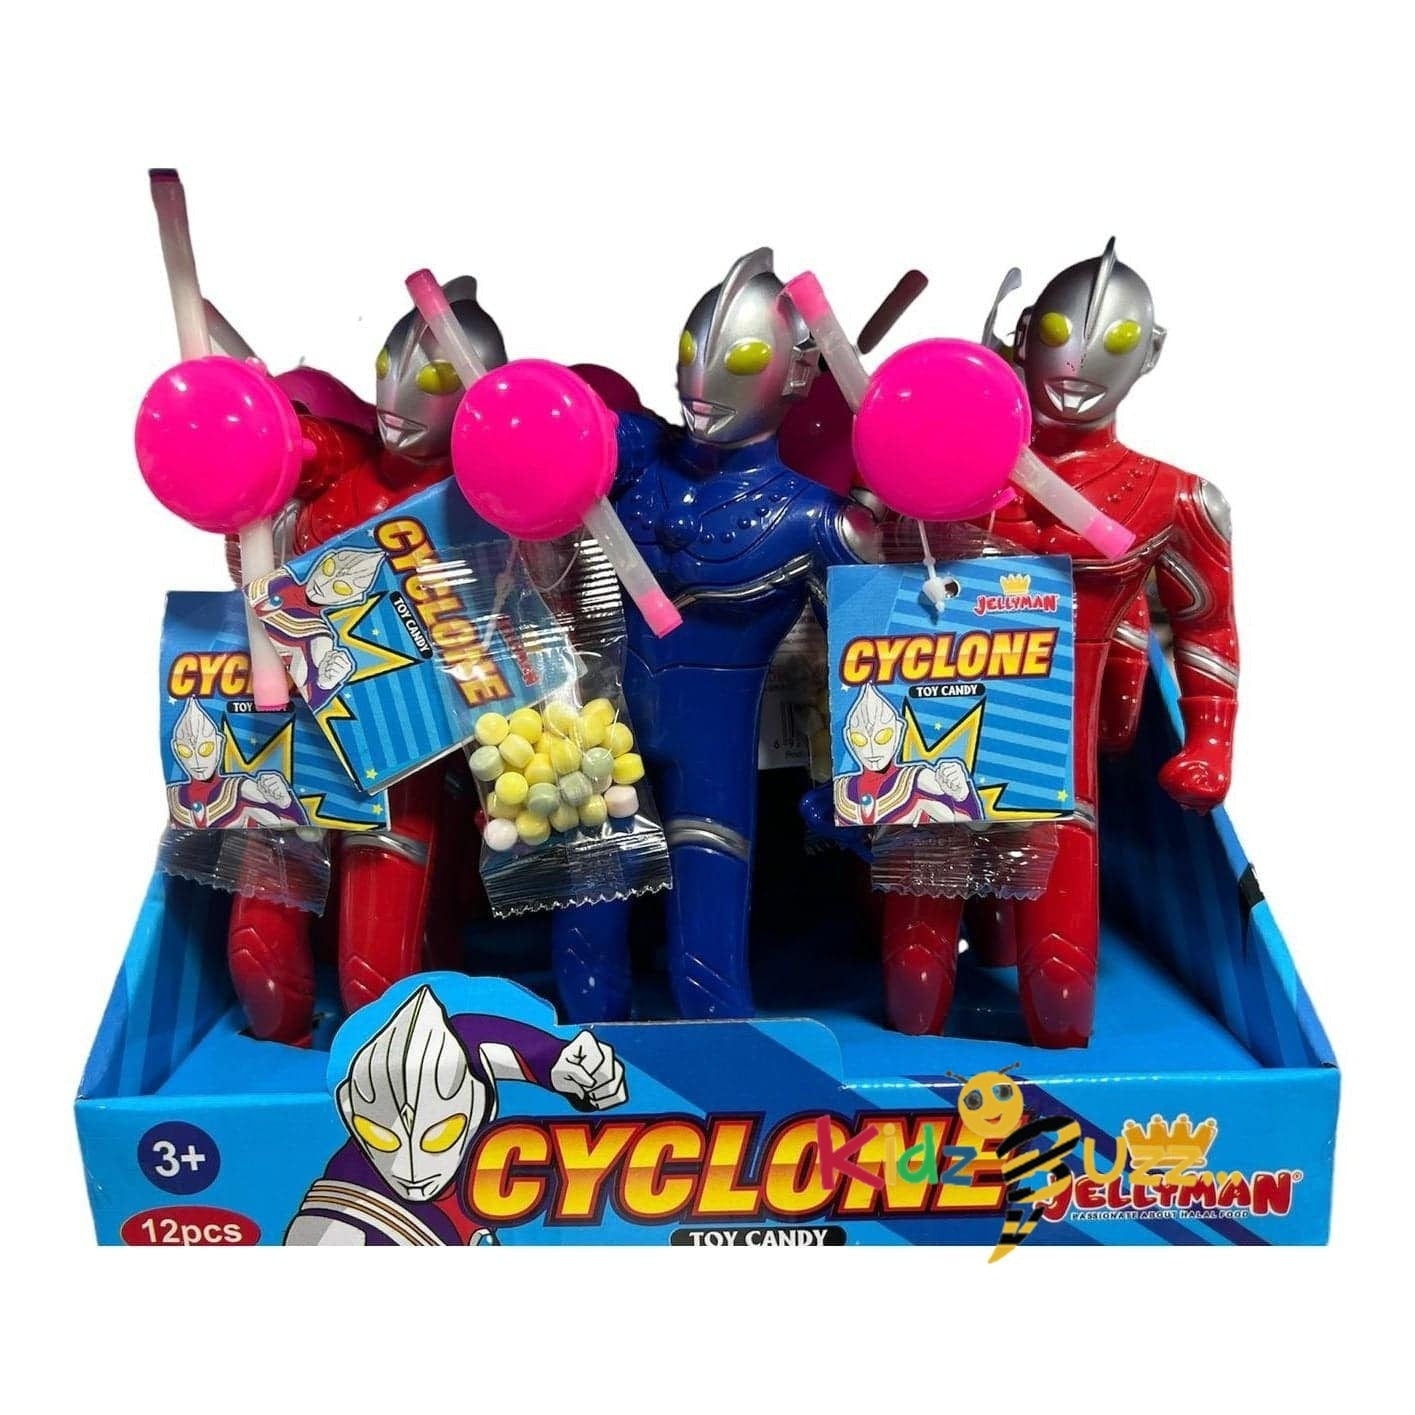 Cyclone Toy Candy